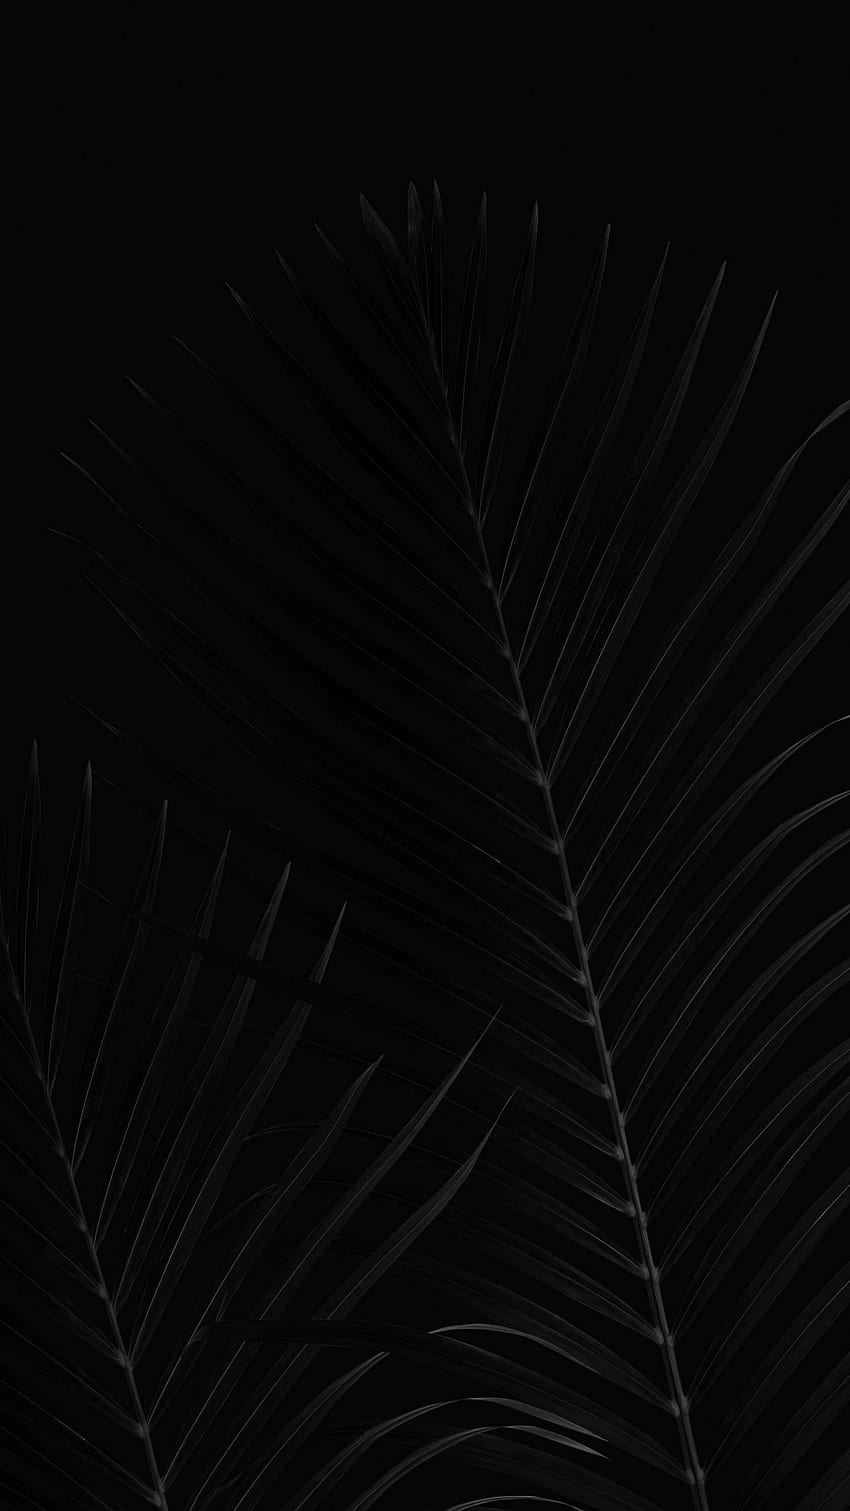 leaves, palm, bw, branches, black q samsung galaxy s6, s7, edge, note, lg g4 background HD phone wallpaper